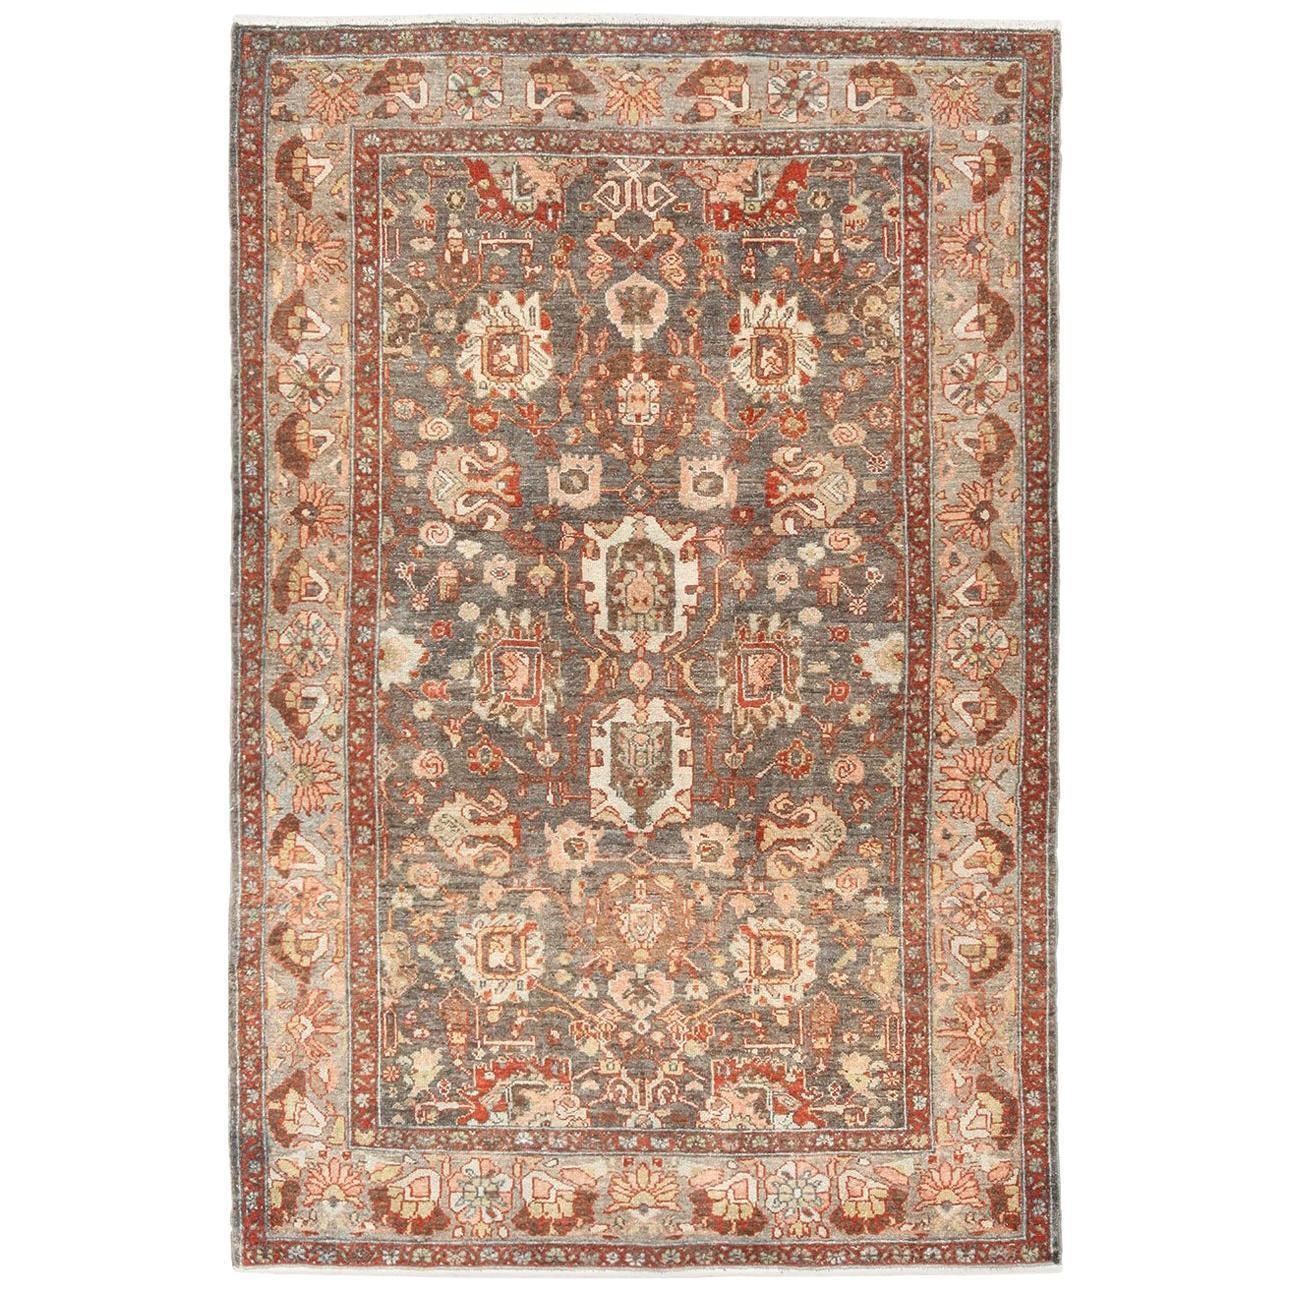 Nazmiyal Collection Antique Malayer Persian Rug. Size: 4 ft 4 in x 6 ft 5 in 